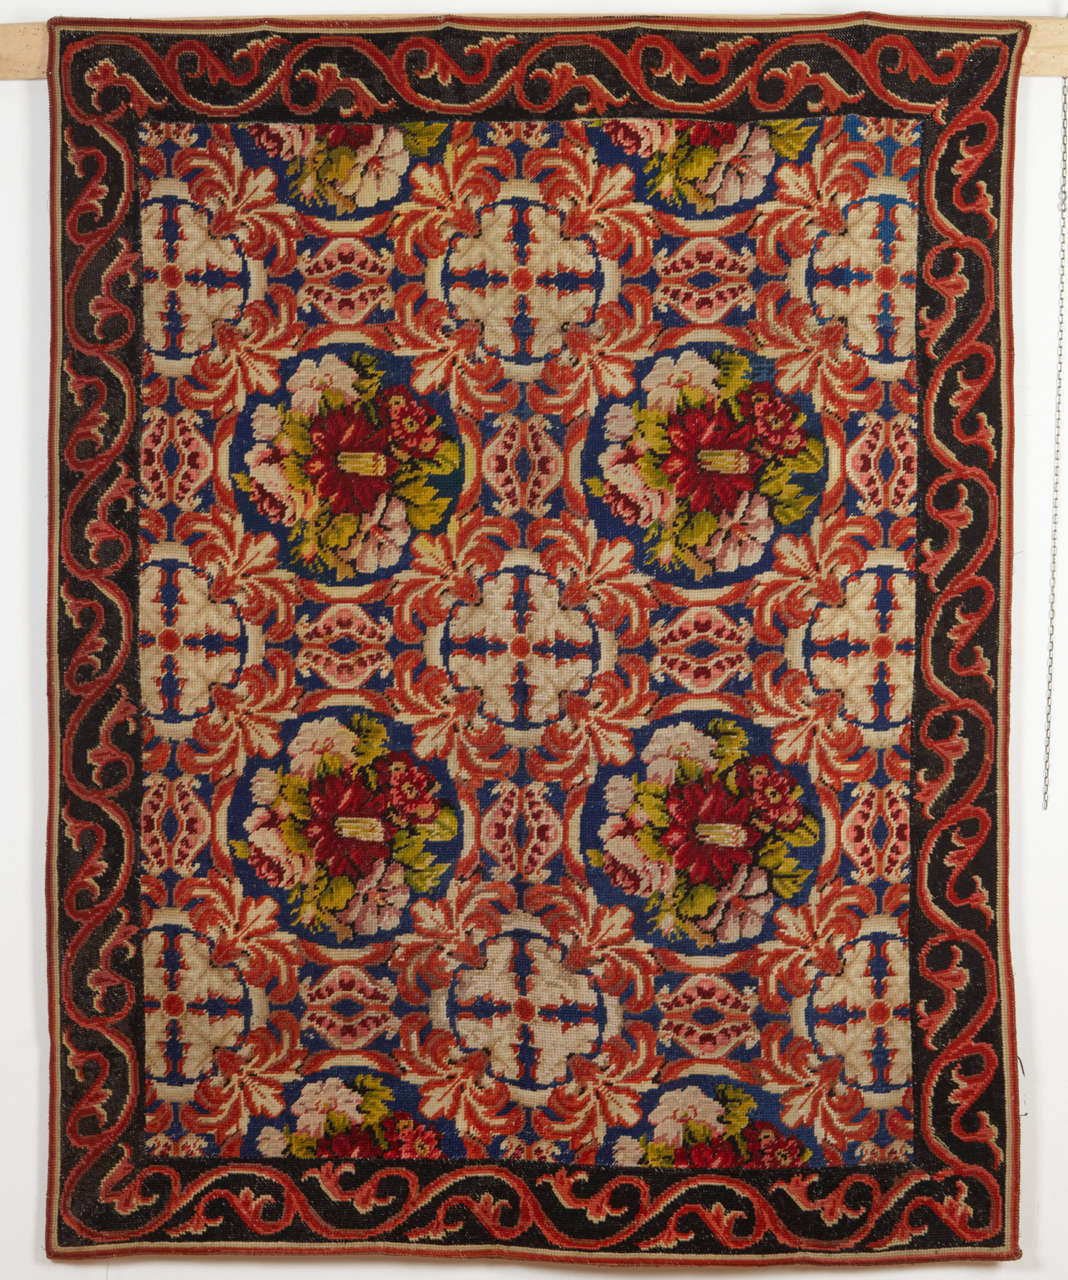 A charming needlepoint rug distinguished by an infinite repeat pattern of floral bouquets alternated by offset parallel rows of leafy roundels. English needlepoints such as this one represent the pinnacle of weaving in the Victorian era.


